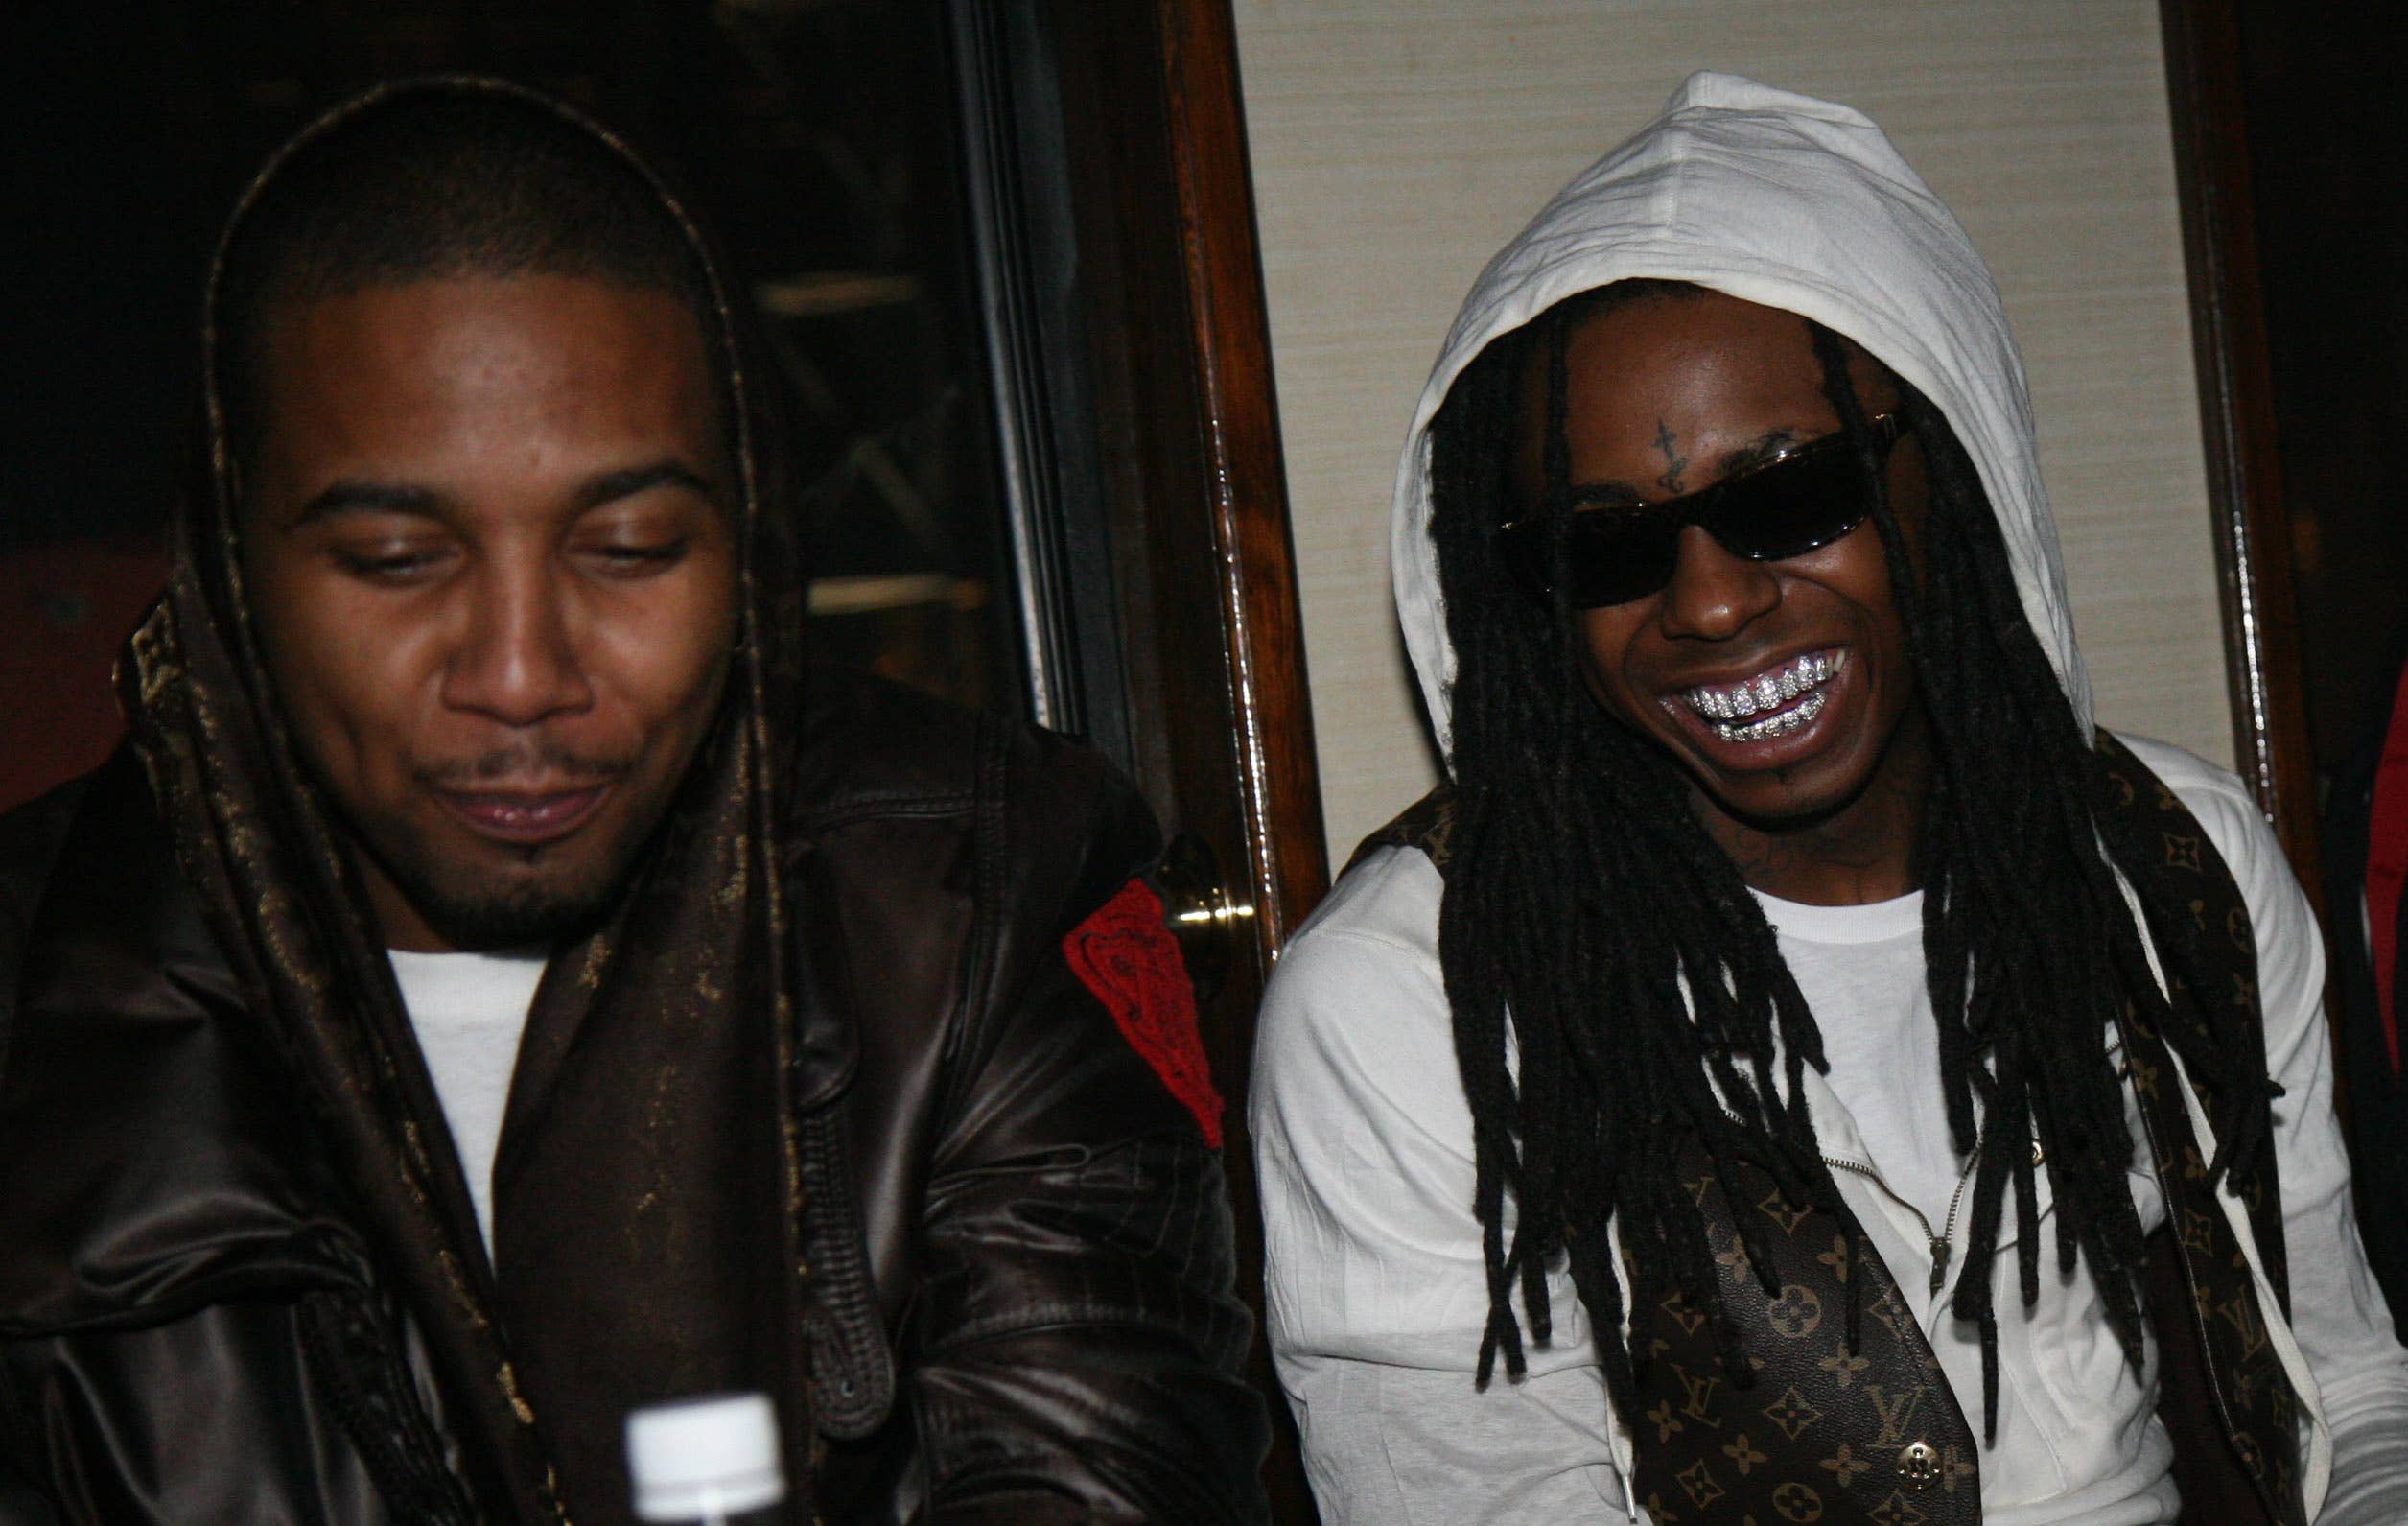 Juelz Santana and Lil Wayne attend the 2008 NBA All-Star Game